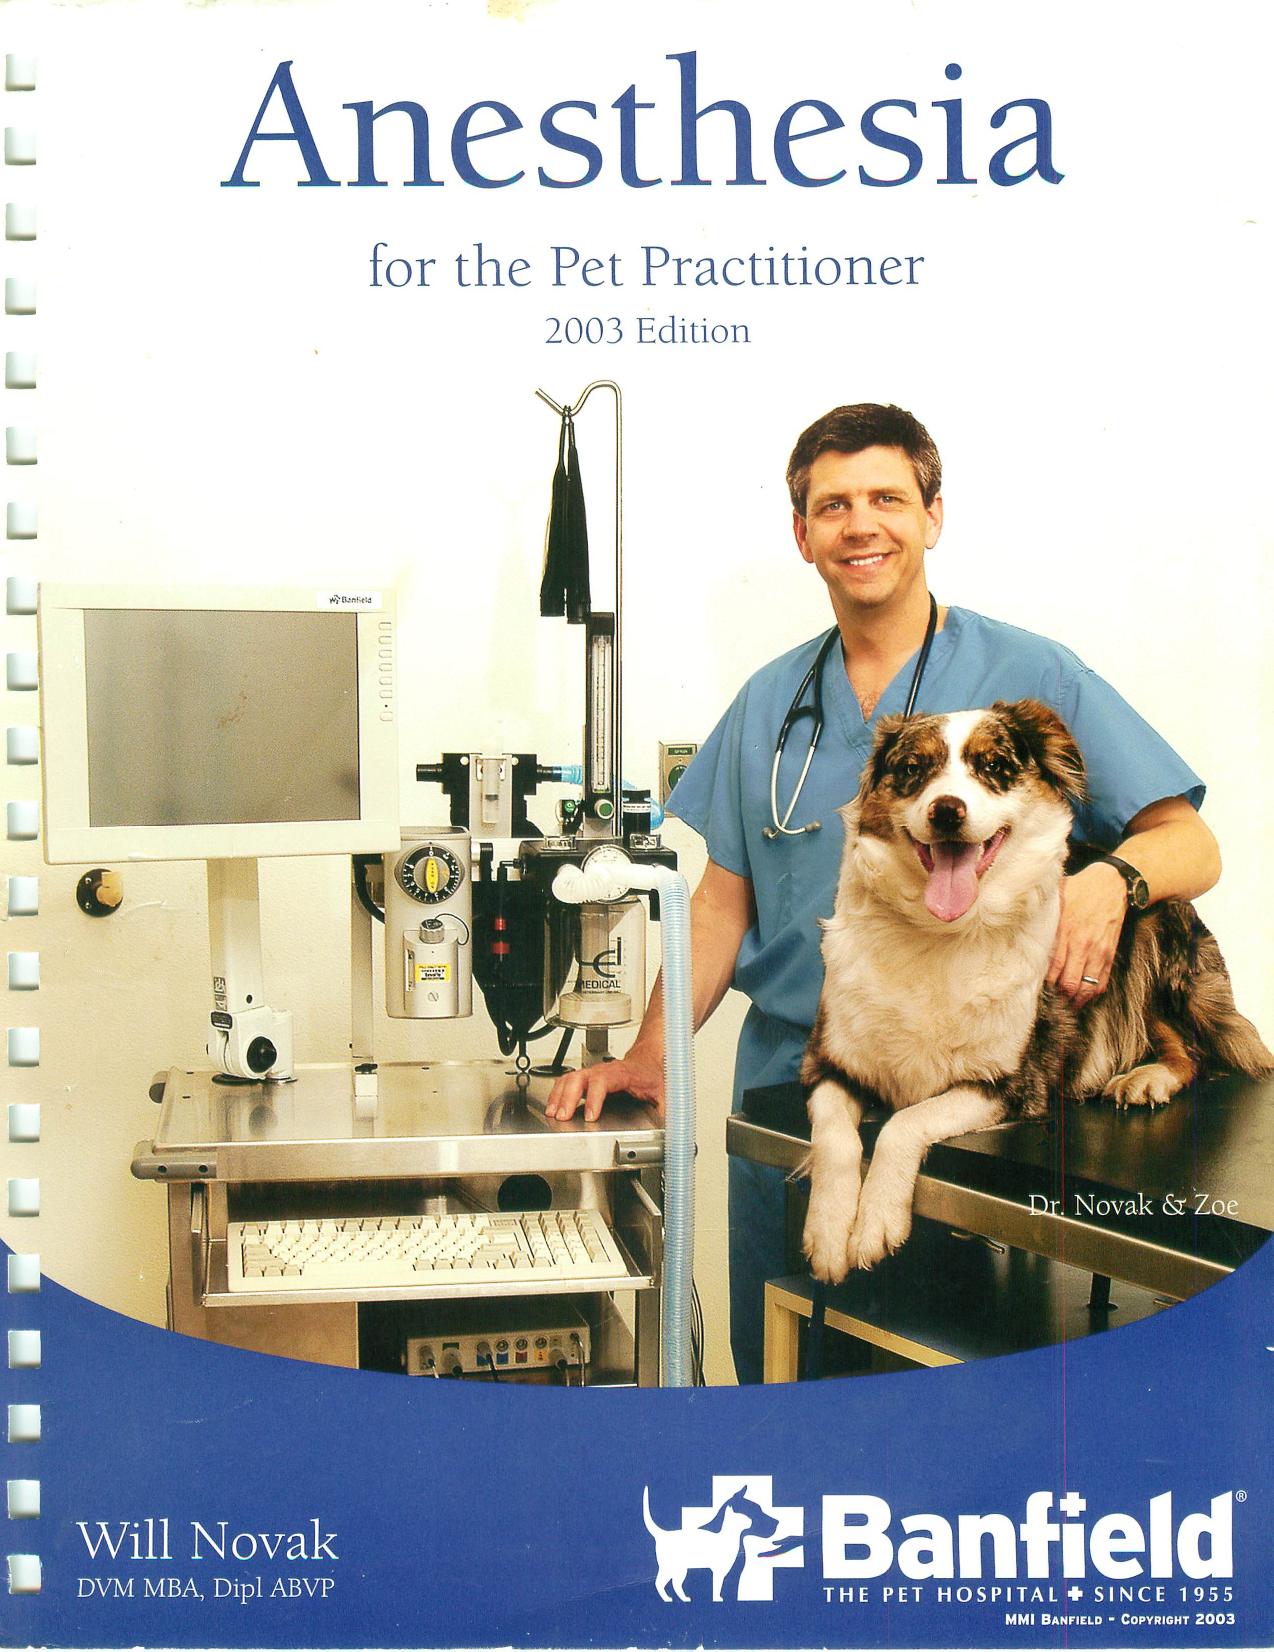 Will Novak-Anesthesia for the Pet Practitioner-Banfield, The Pet Hospital 2003